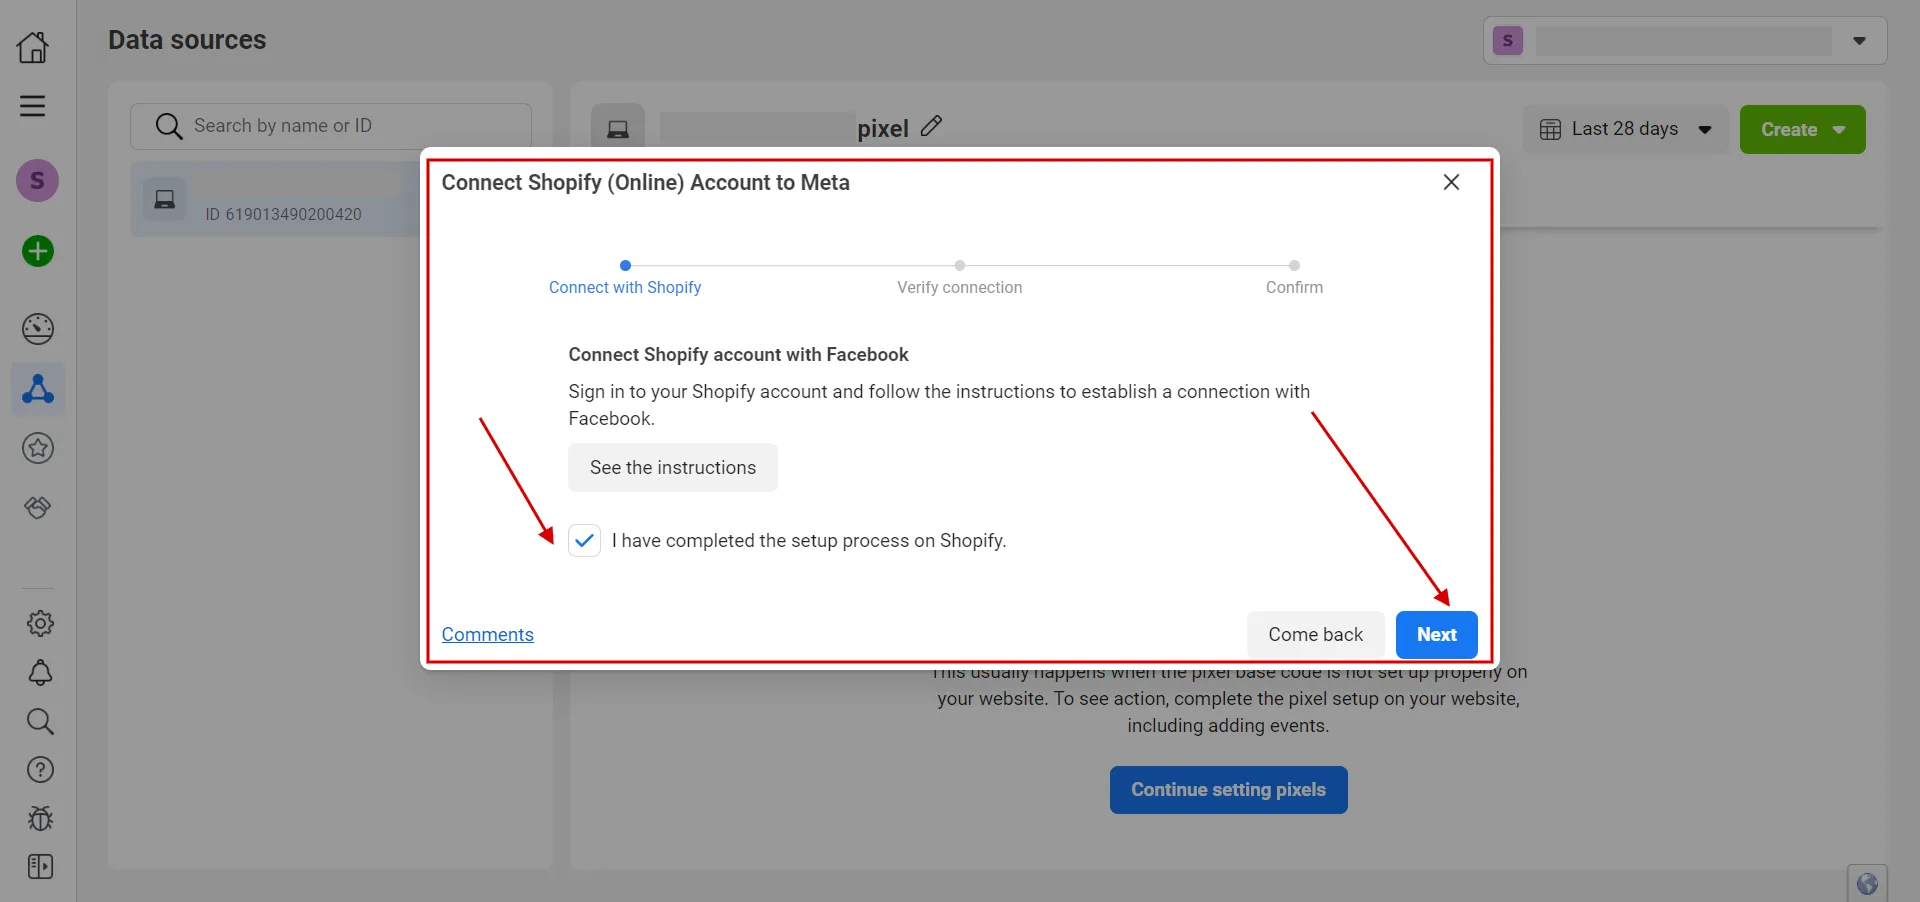 Connect Shopify account with Facebook.